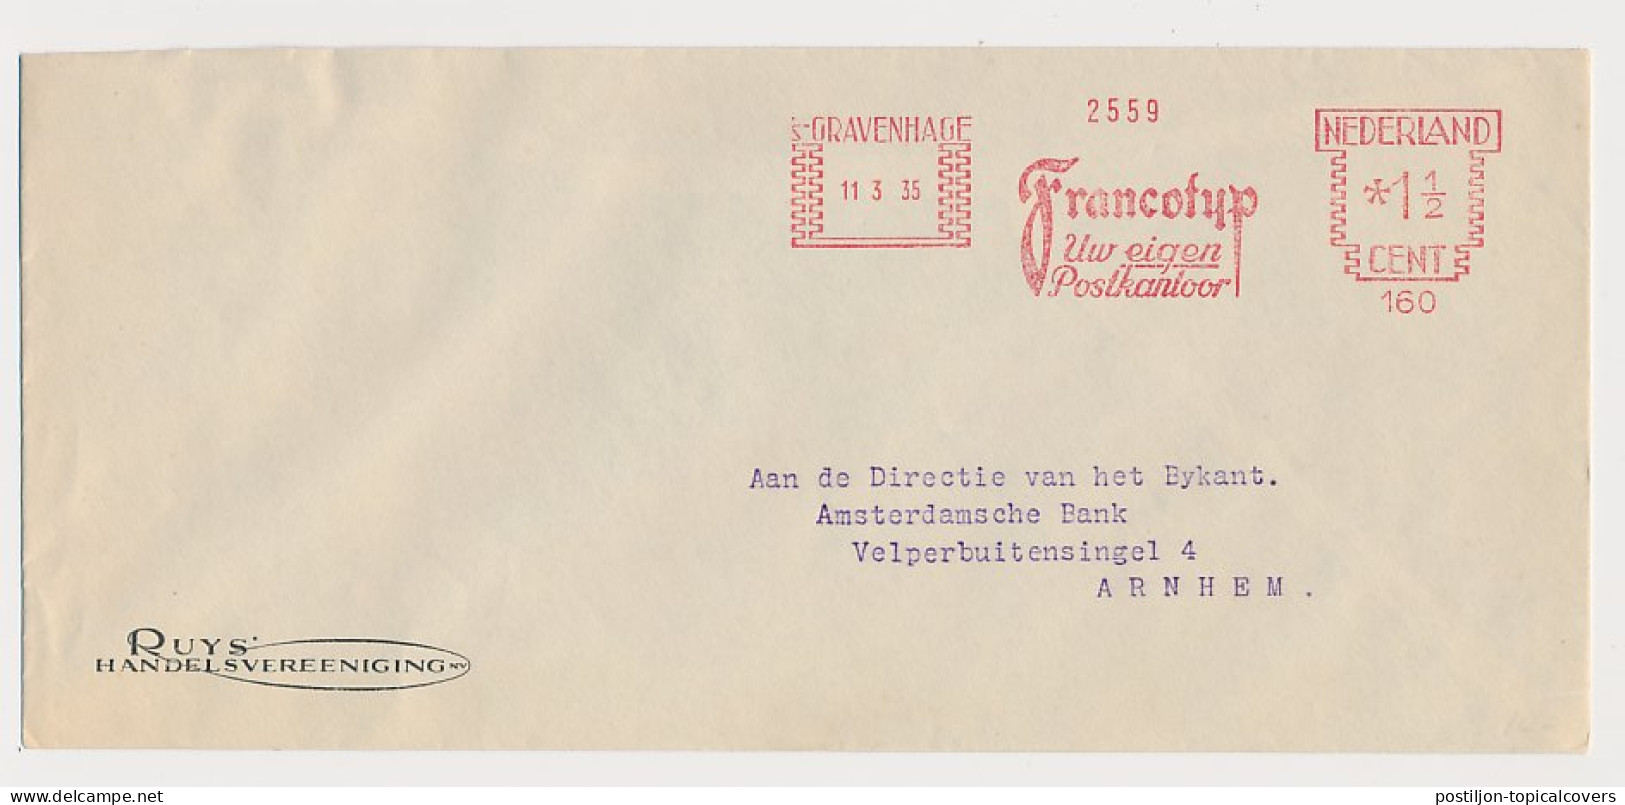 Meter Cover Netherlands 1935 Francotyp - The Hague - Machine Labels [ATM]